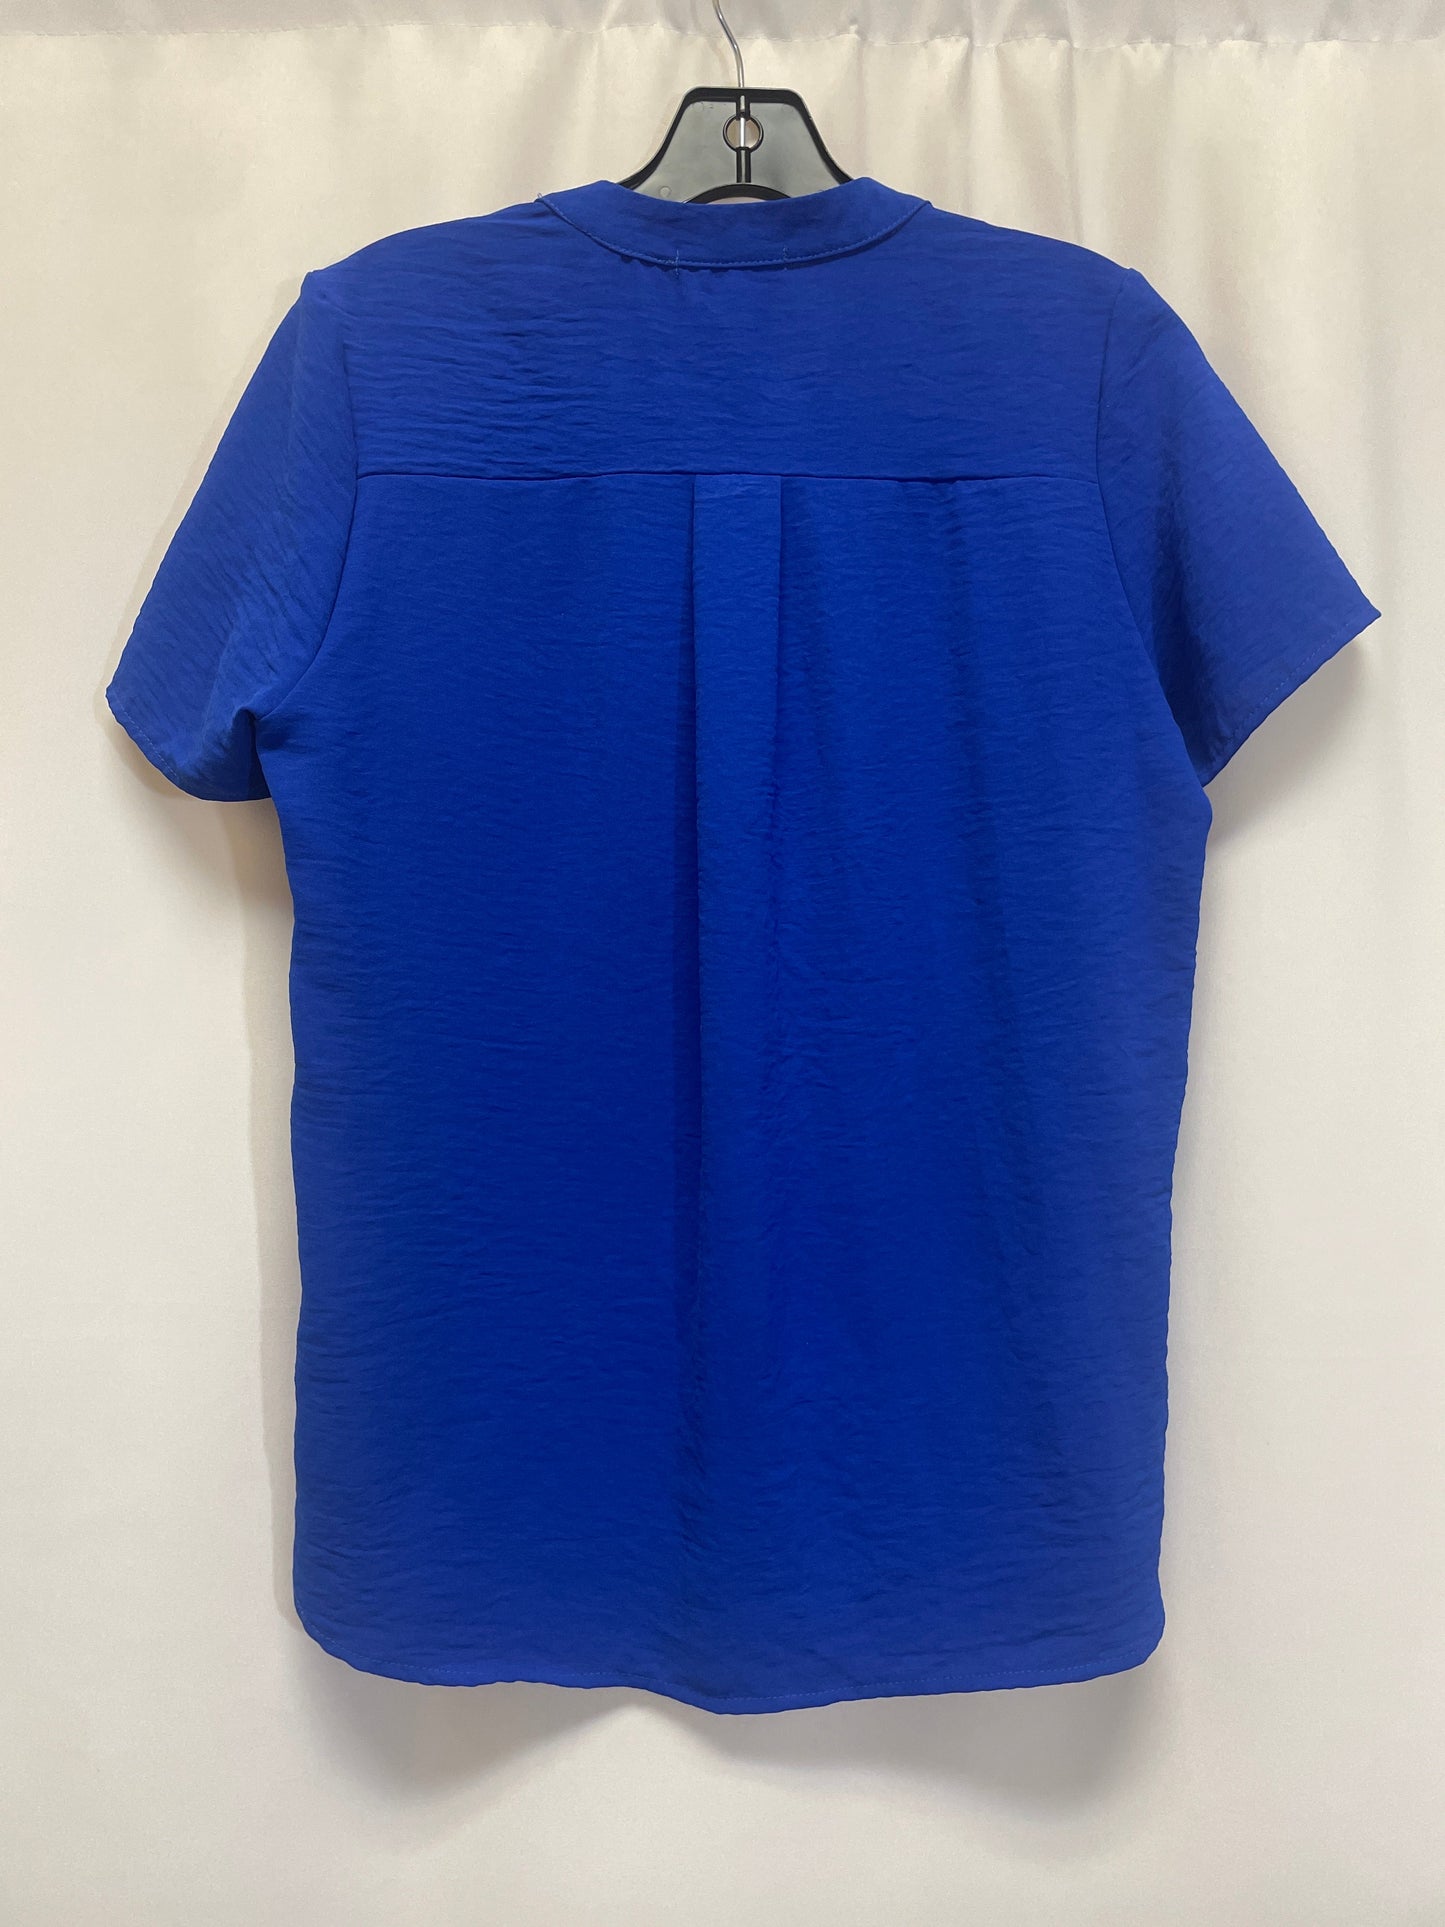 Blue Top Short Sleeve Entro, Size S